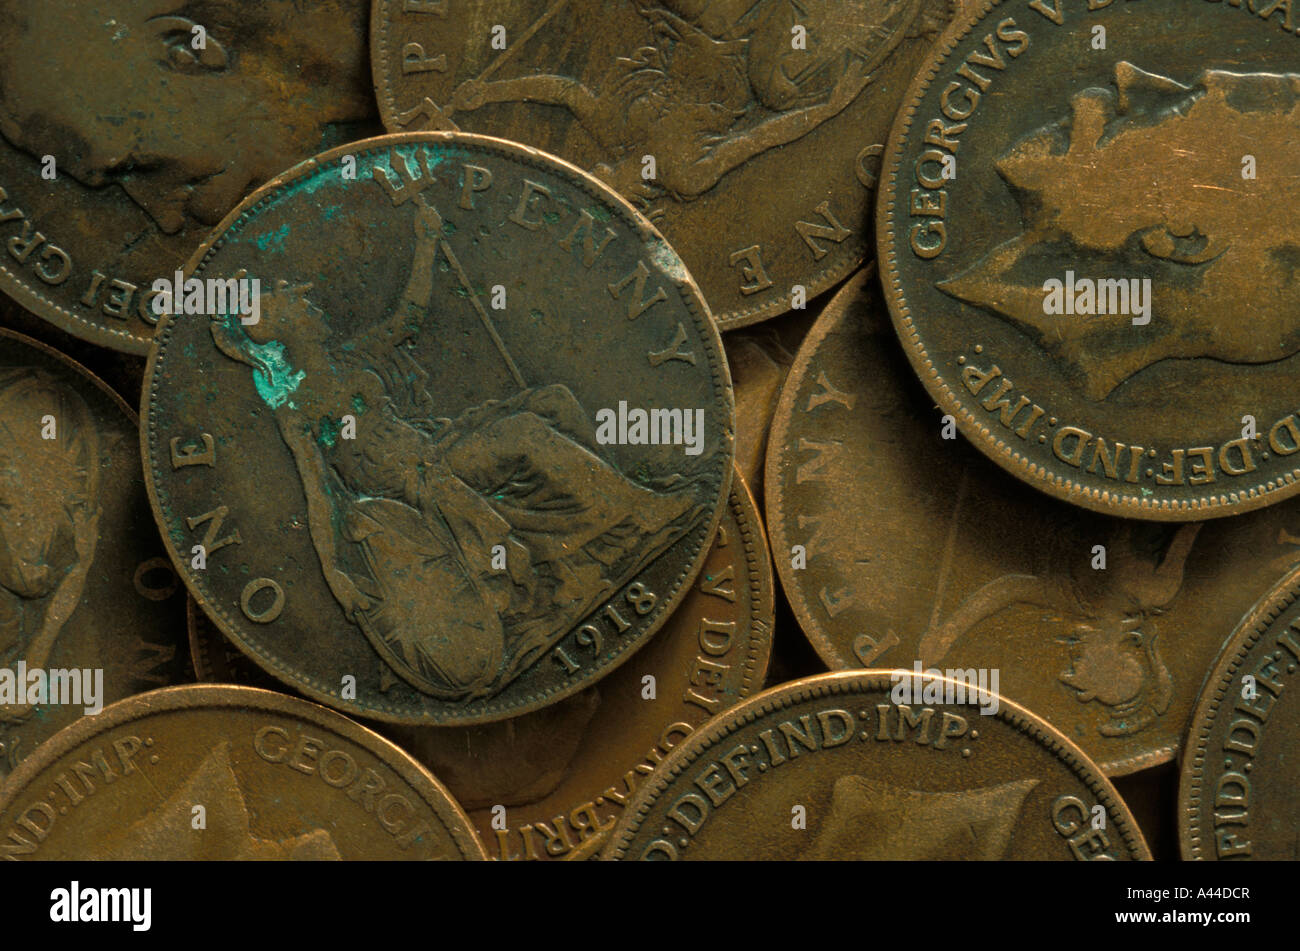 Old British coins copper pennies Stock Photo